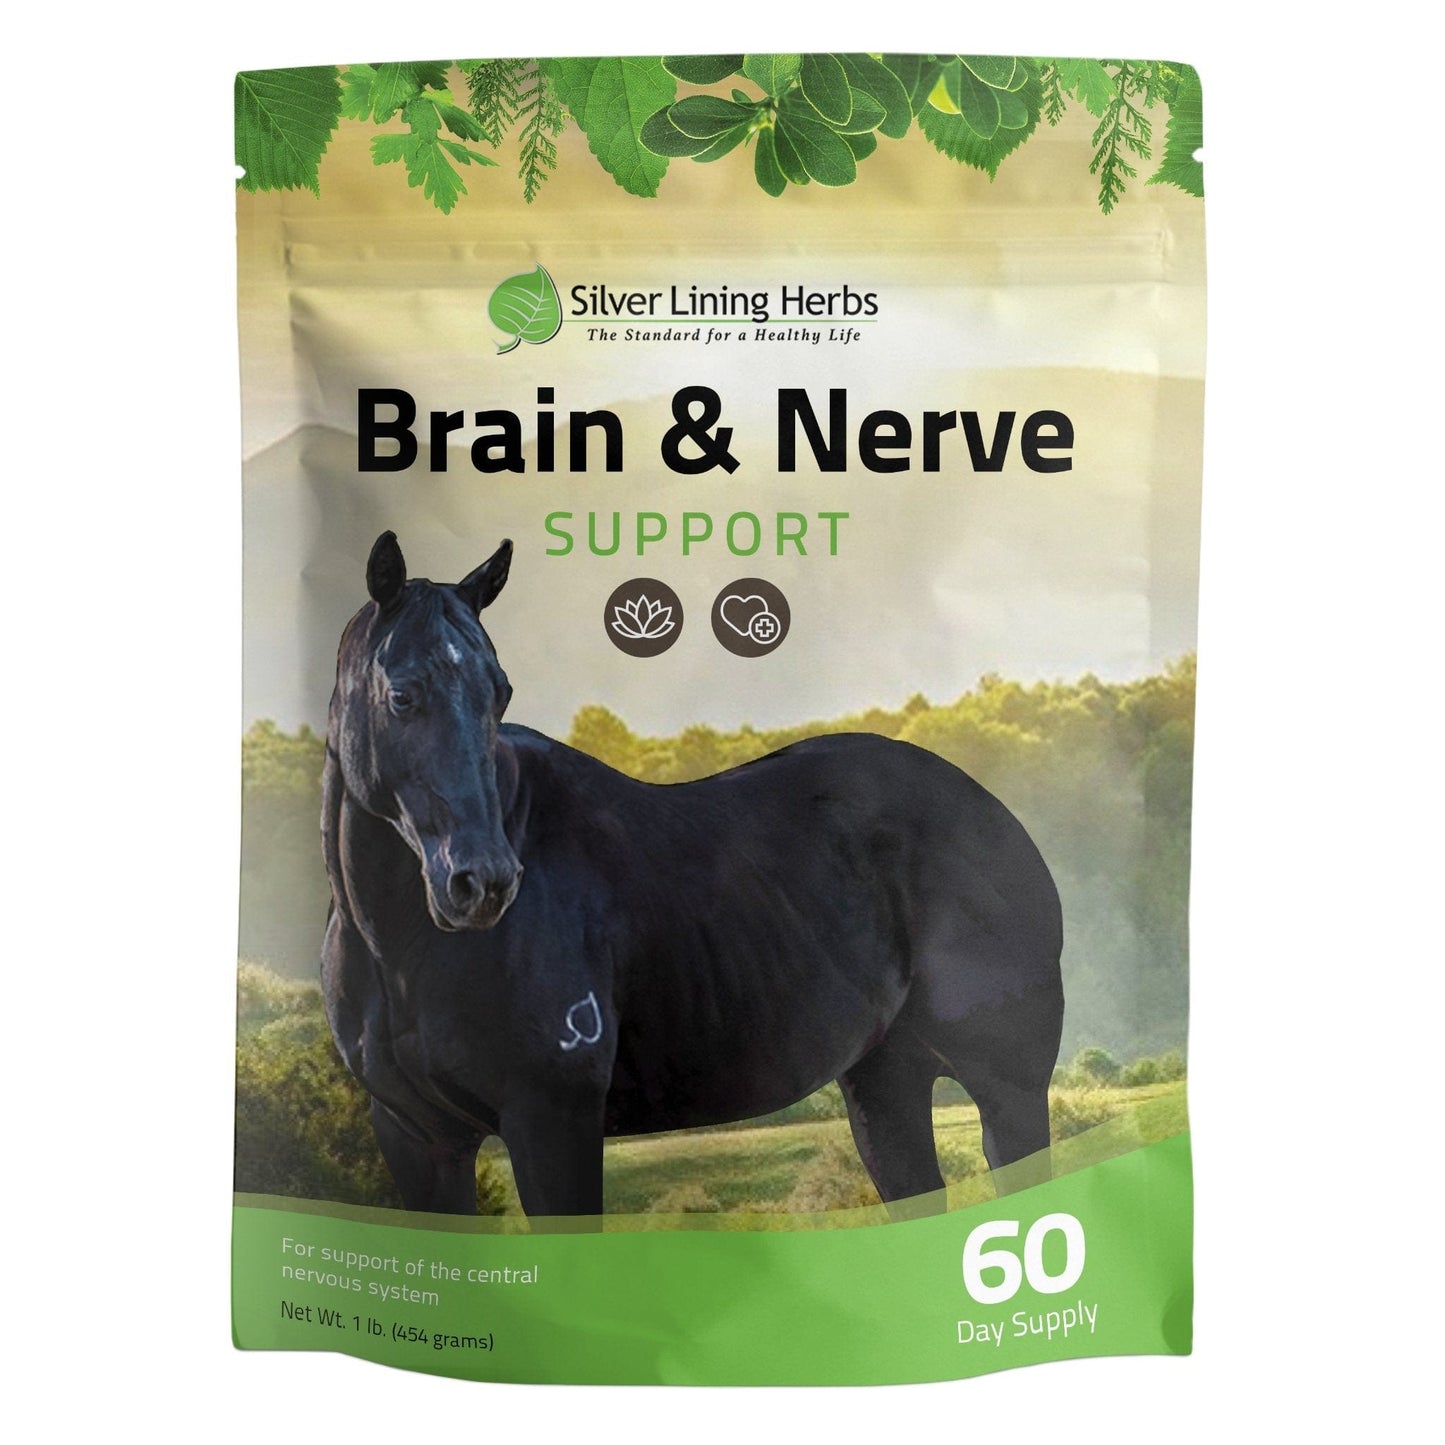 Brain & Nerve Support for Horses - Silver Lining Herbs